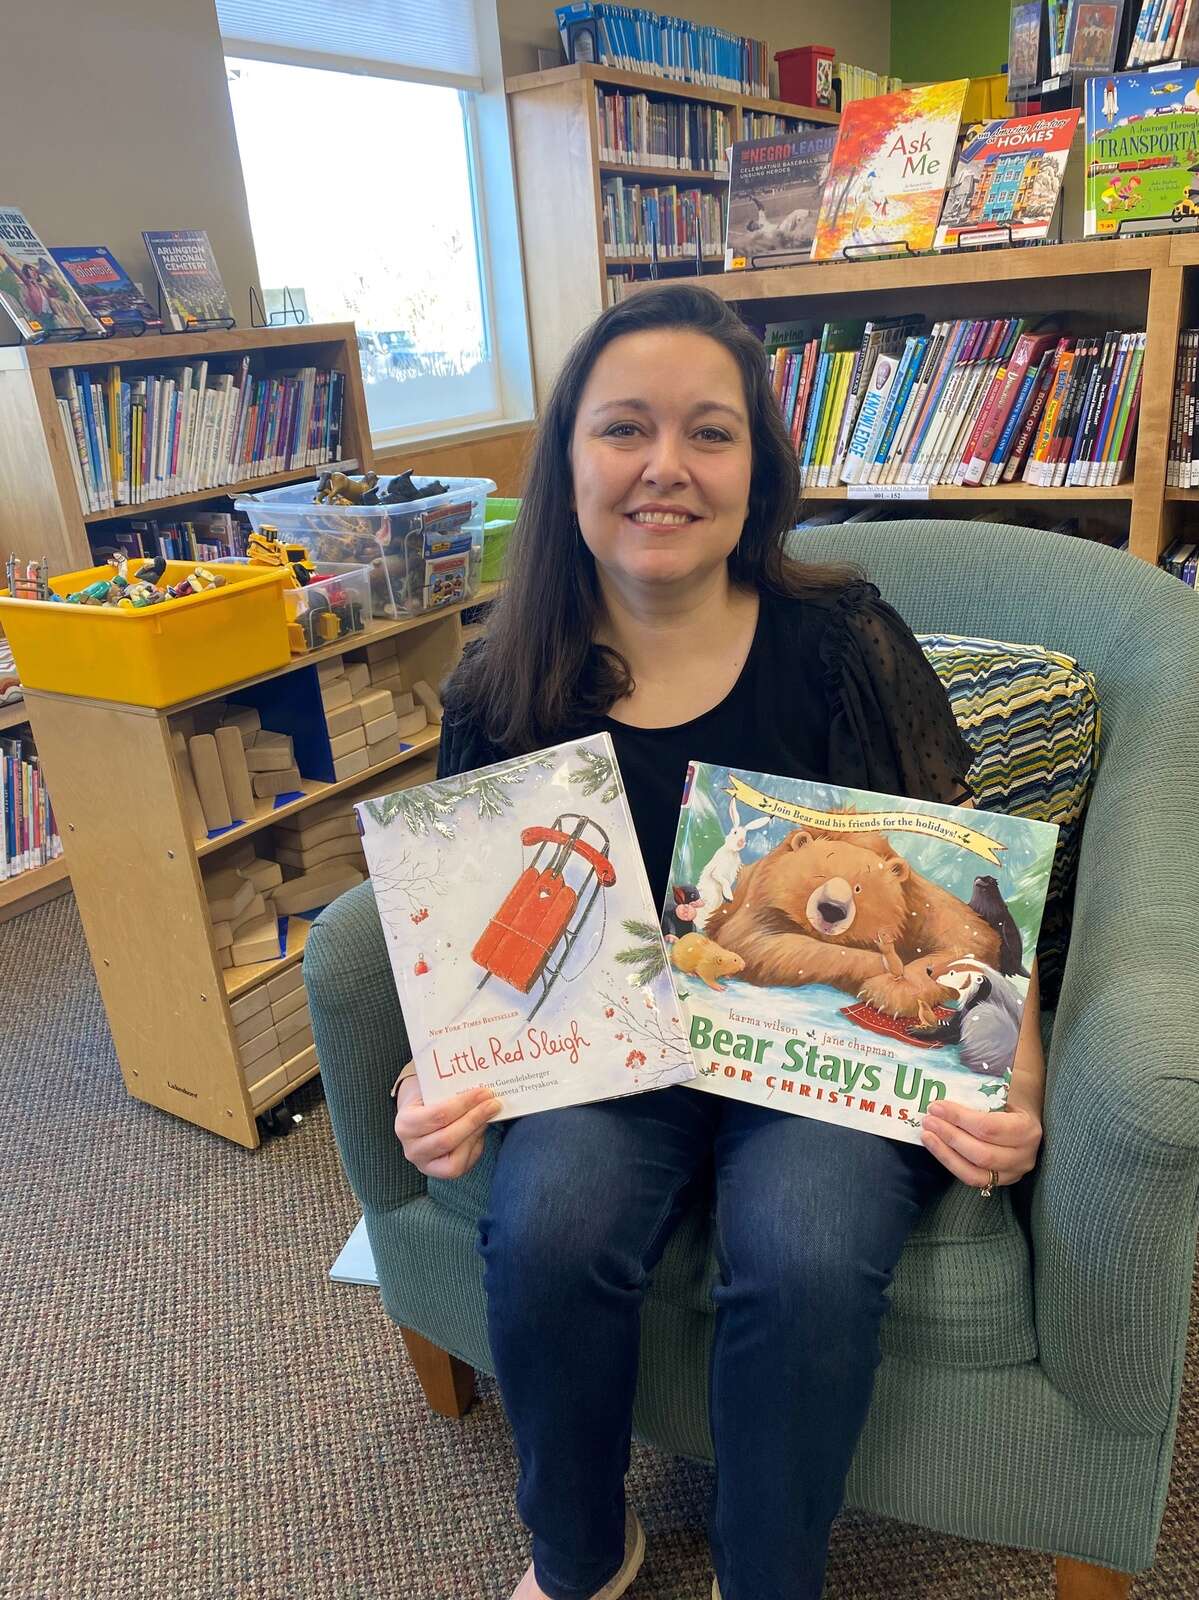 Bridget Weleski, youth services leader at South Butler Community Library, holds up two favorite Christmas books